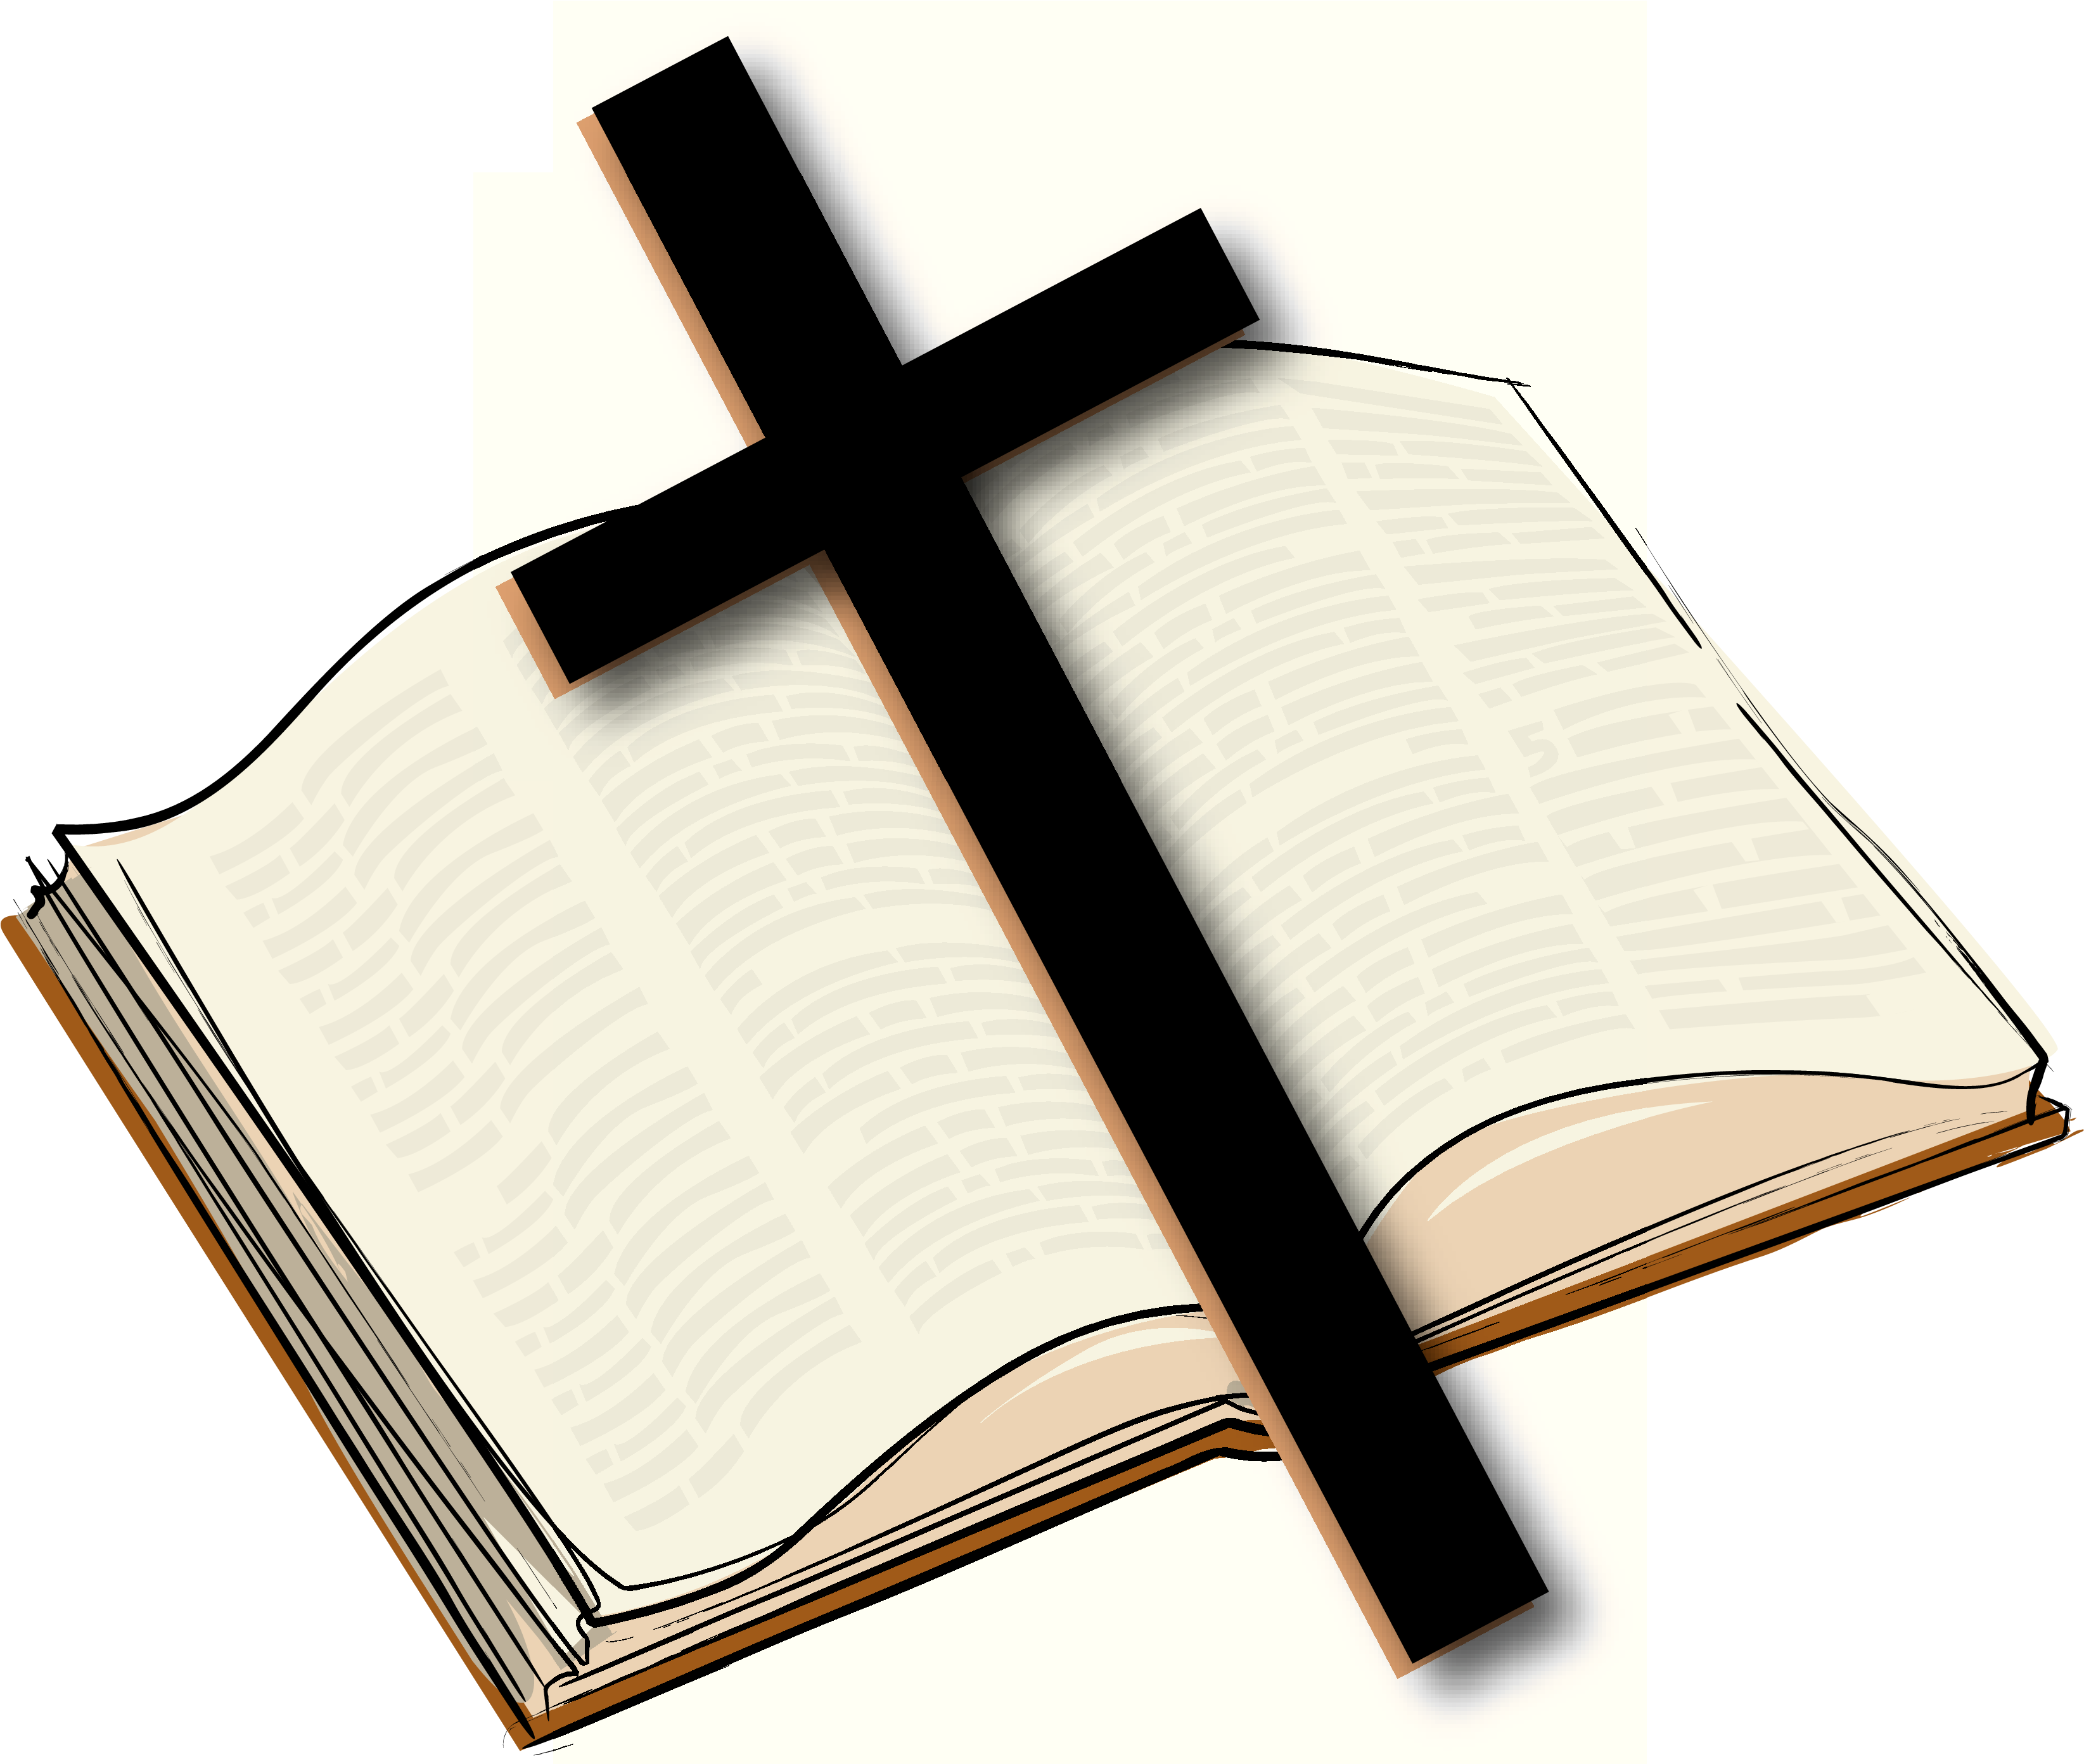 View Larger Image - Cross And Bible Clip Art (3300x2783)